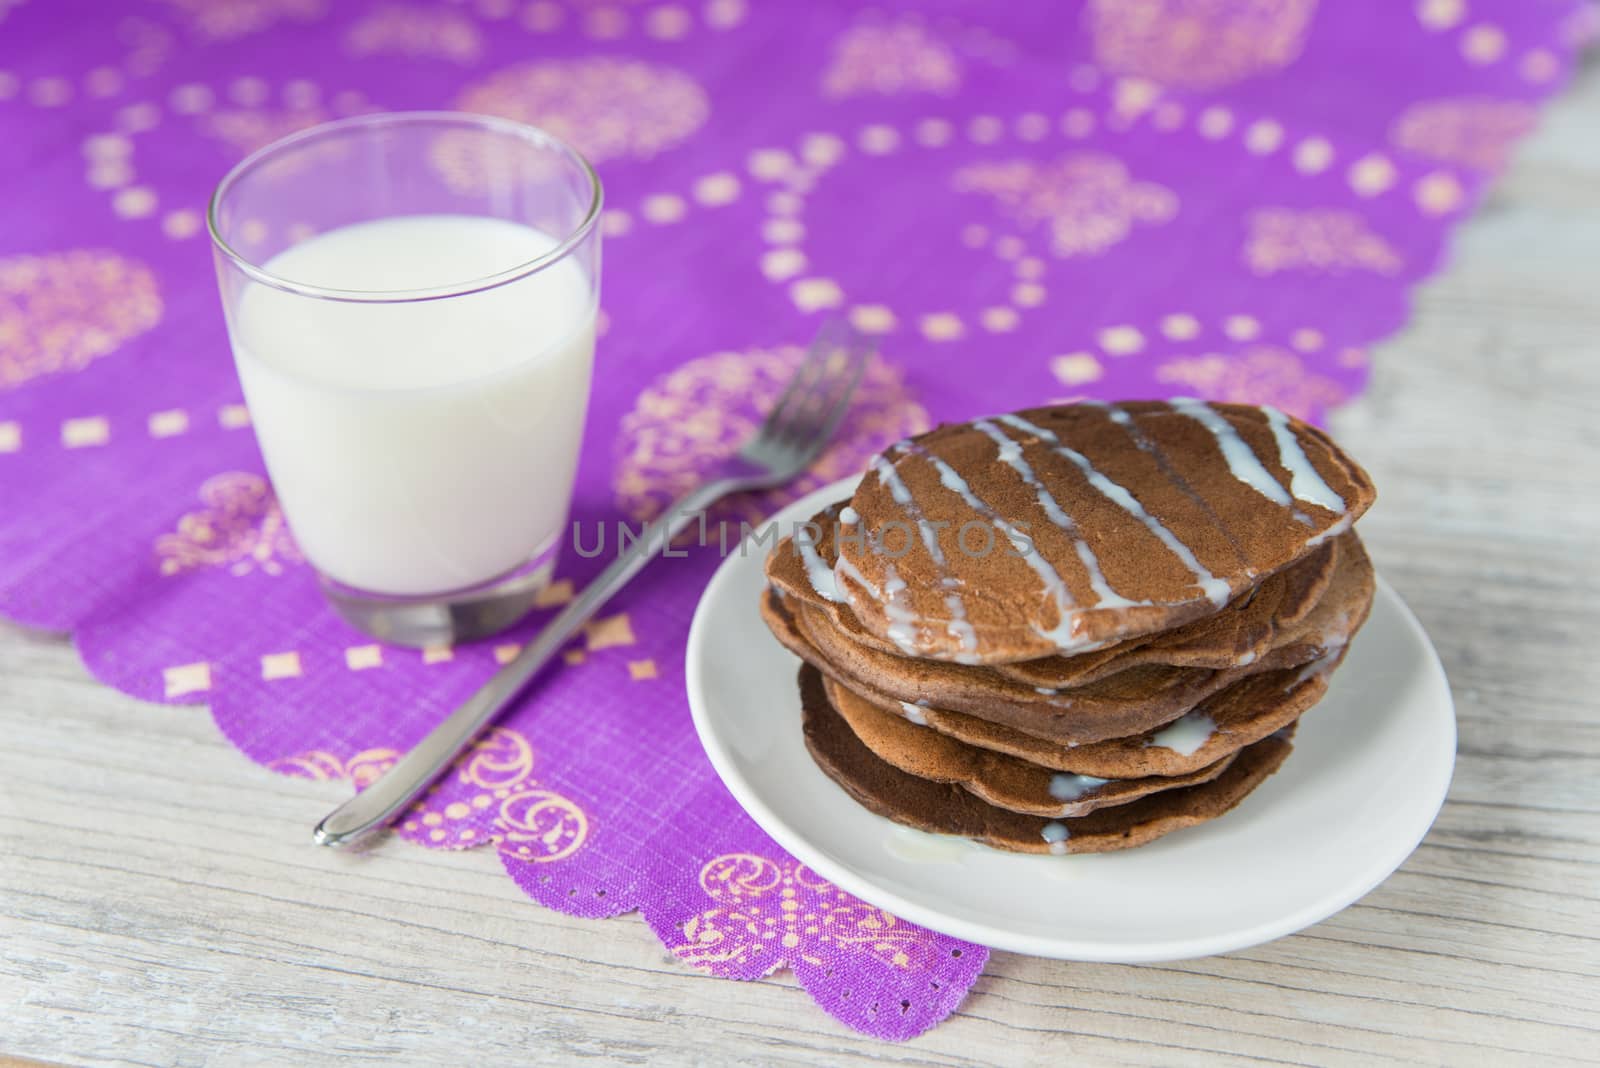 Chocolate pancakes with the glass of milk